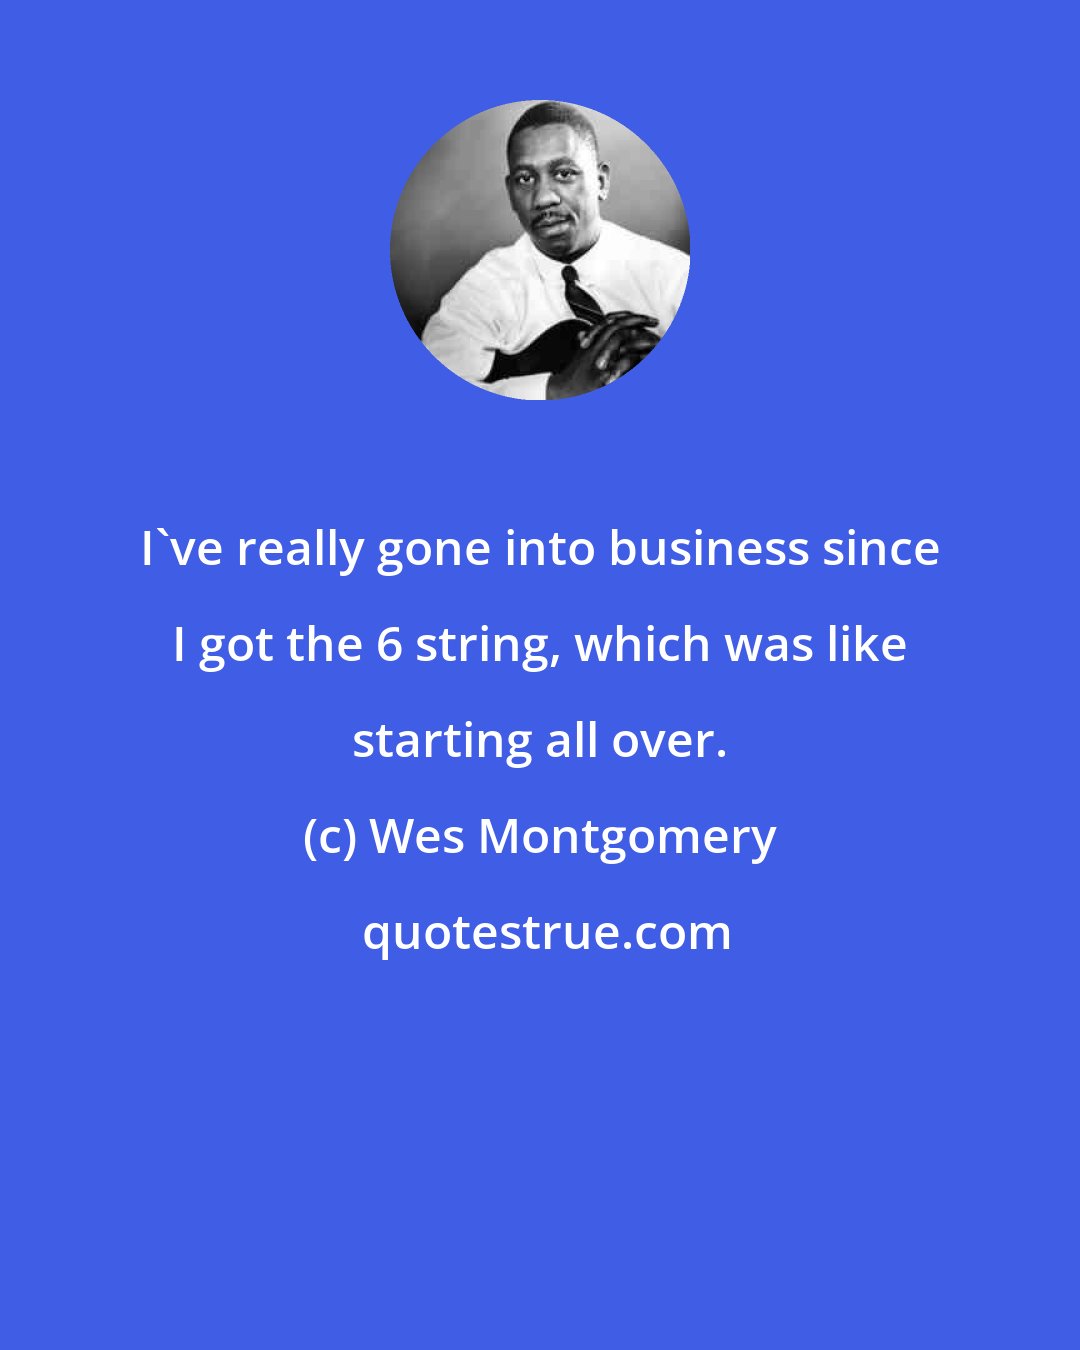 Wes Montgomery: I've really gone into business since I got the 6 string, which was like starting all over.